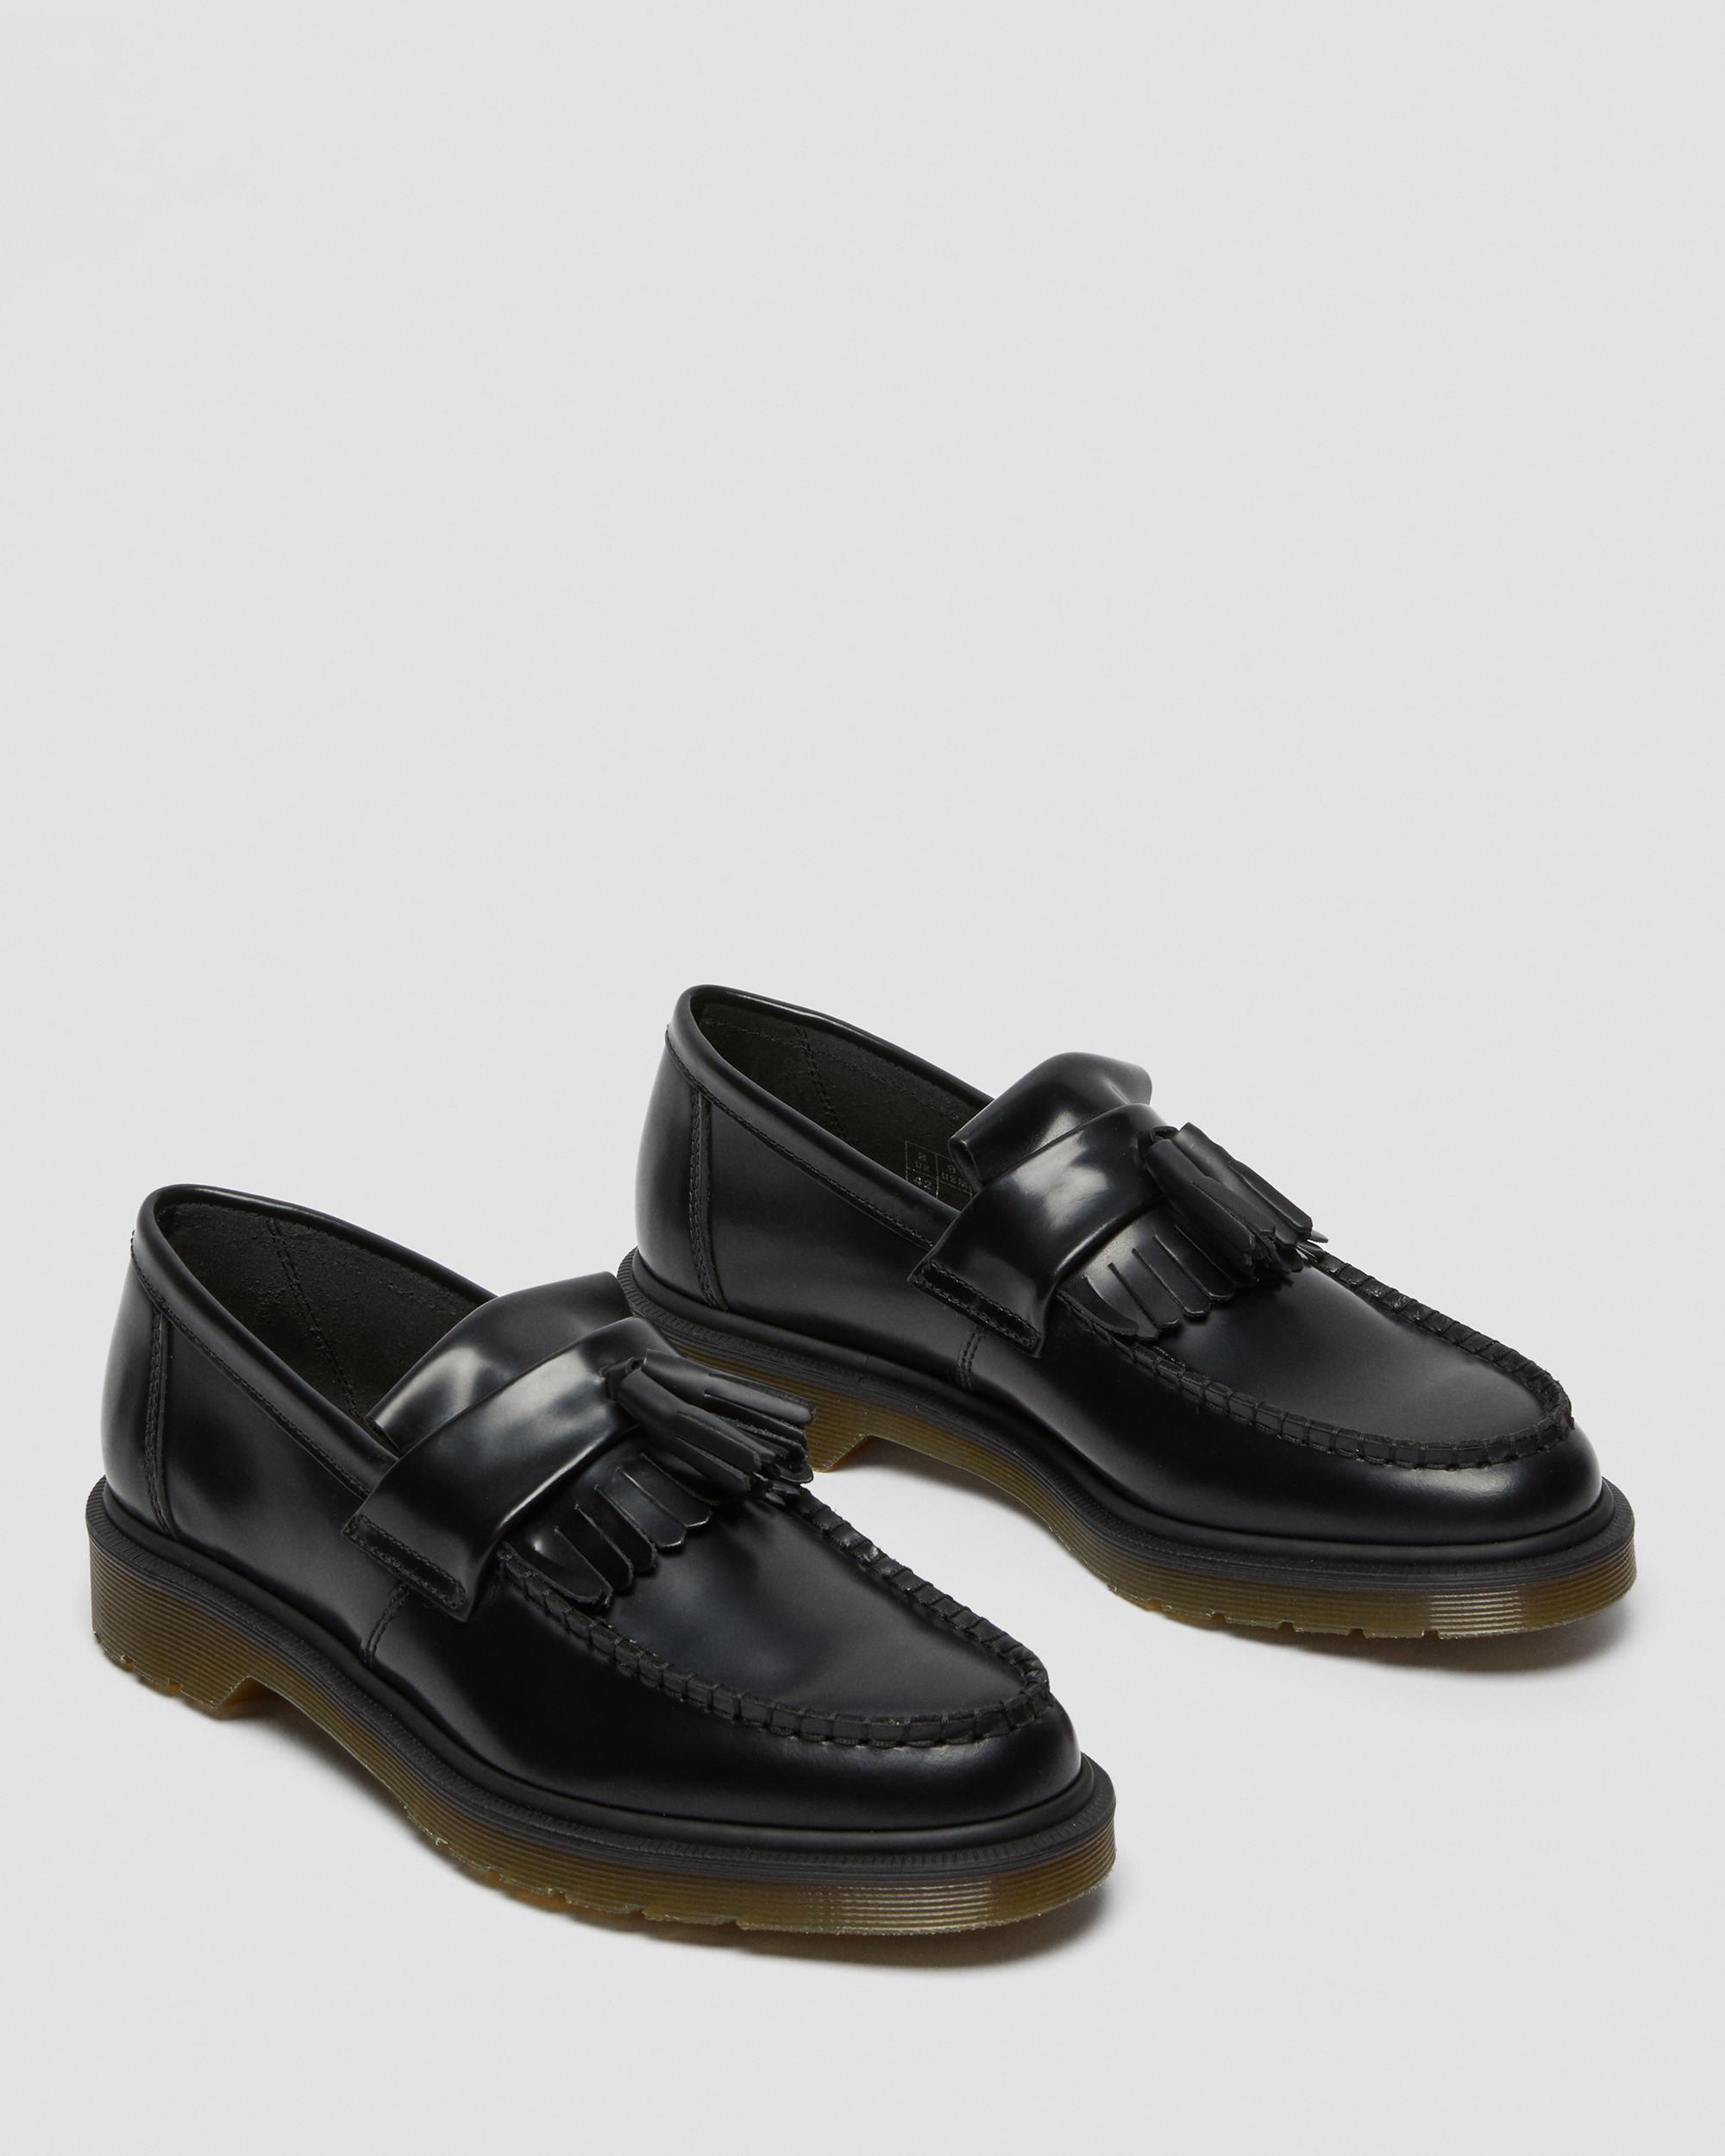 ADRIAN LEATHER TASSEL LOAFERS | Dr. Martens